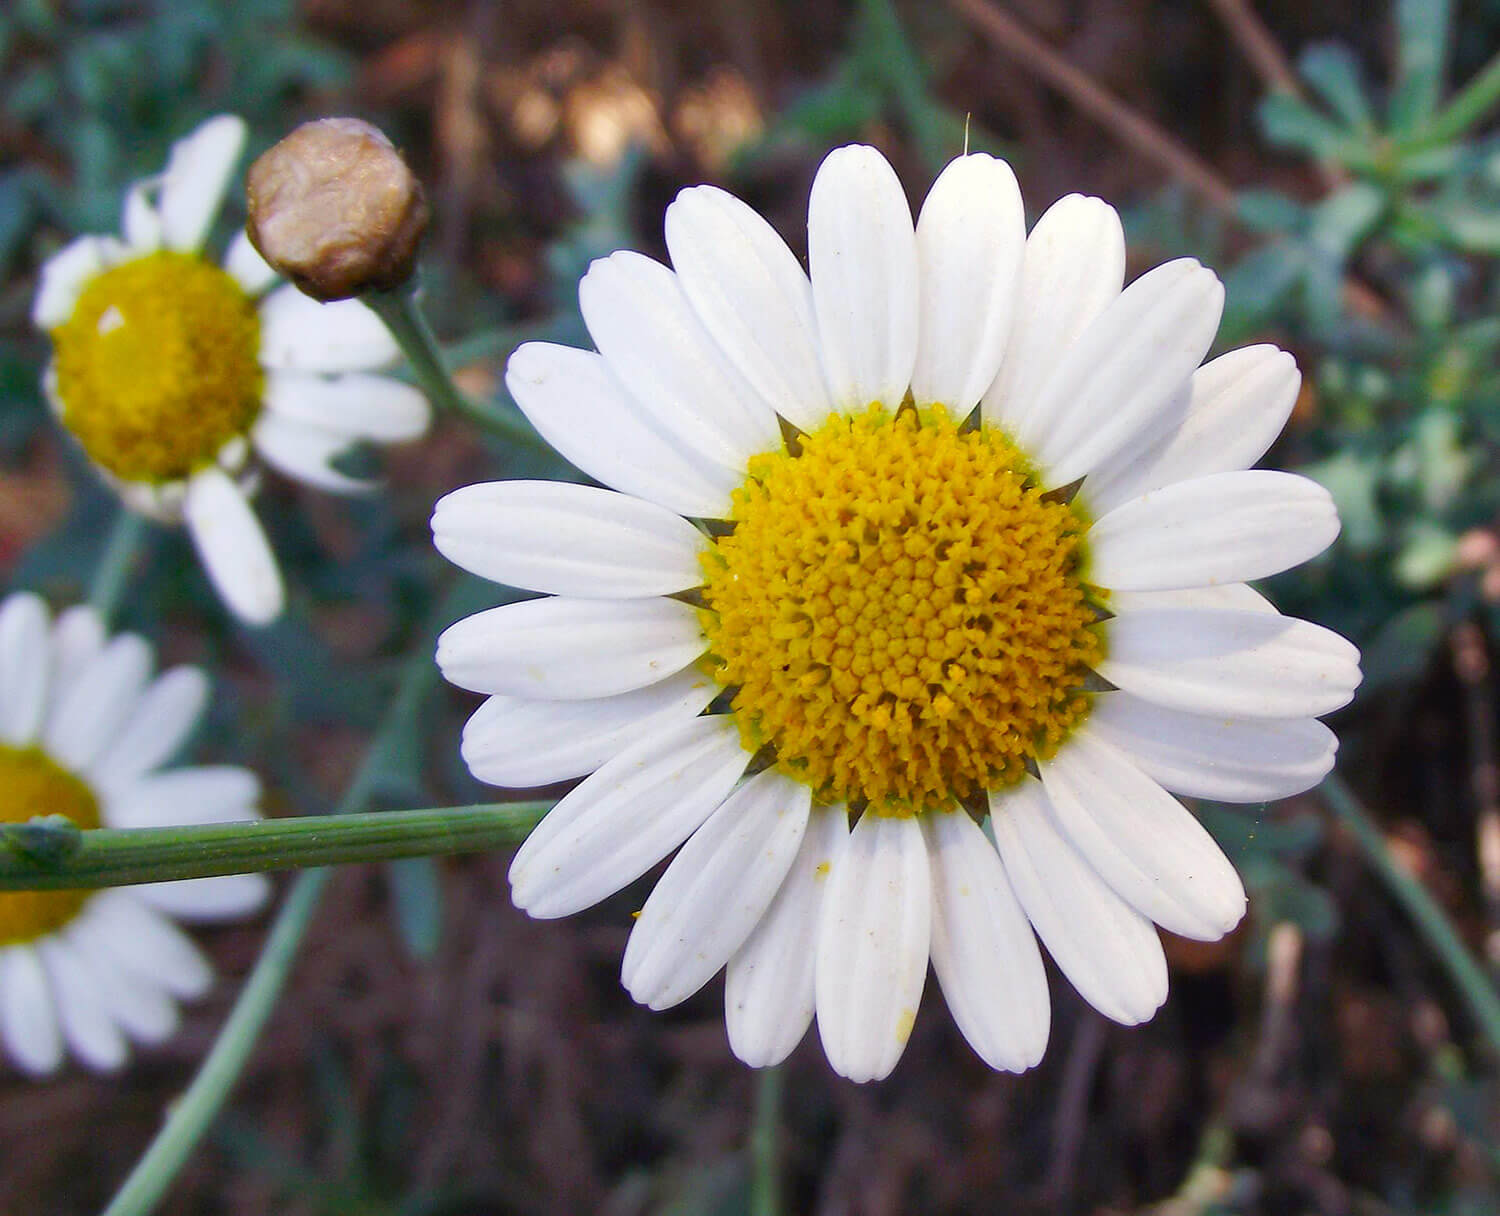 The marguerite is a type of daisy 